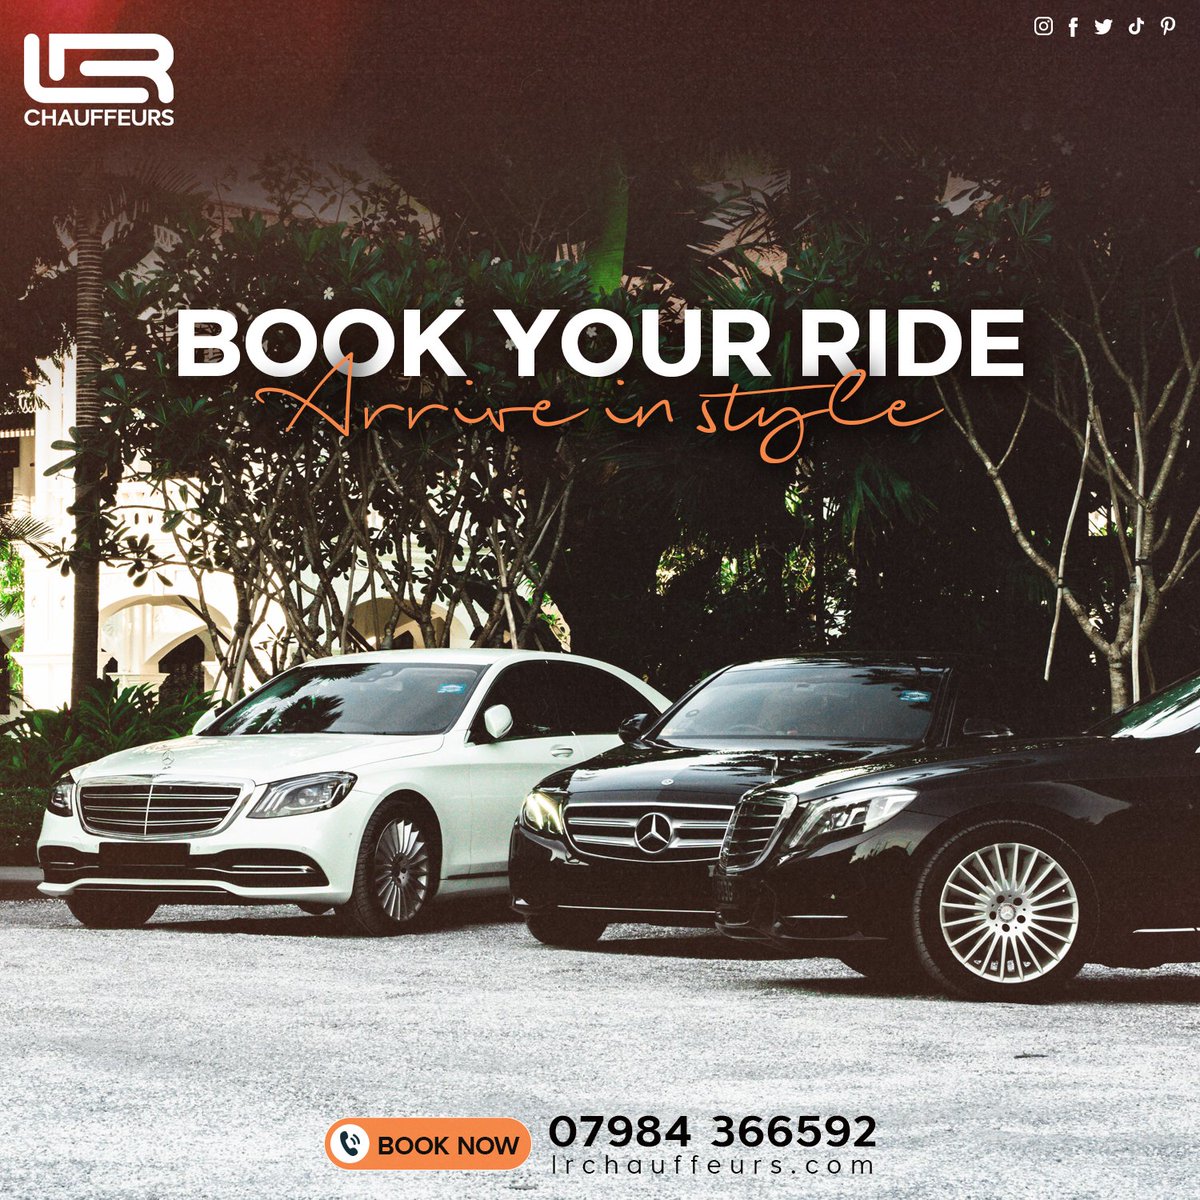 Elevate your travel experience with LR Chauffeurs' premium fleet of luxury vehicles...

Call Us for Bookings: +44 7984 366592
Visit Us: lrchauffeurs.com

#LRChauffeurs #chauffeurlondon #chauffeurservice #chauffeurdriven